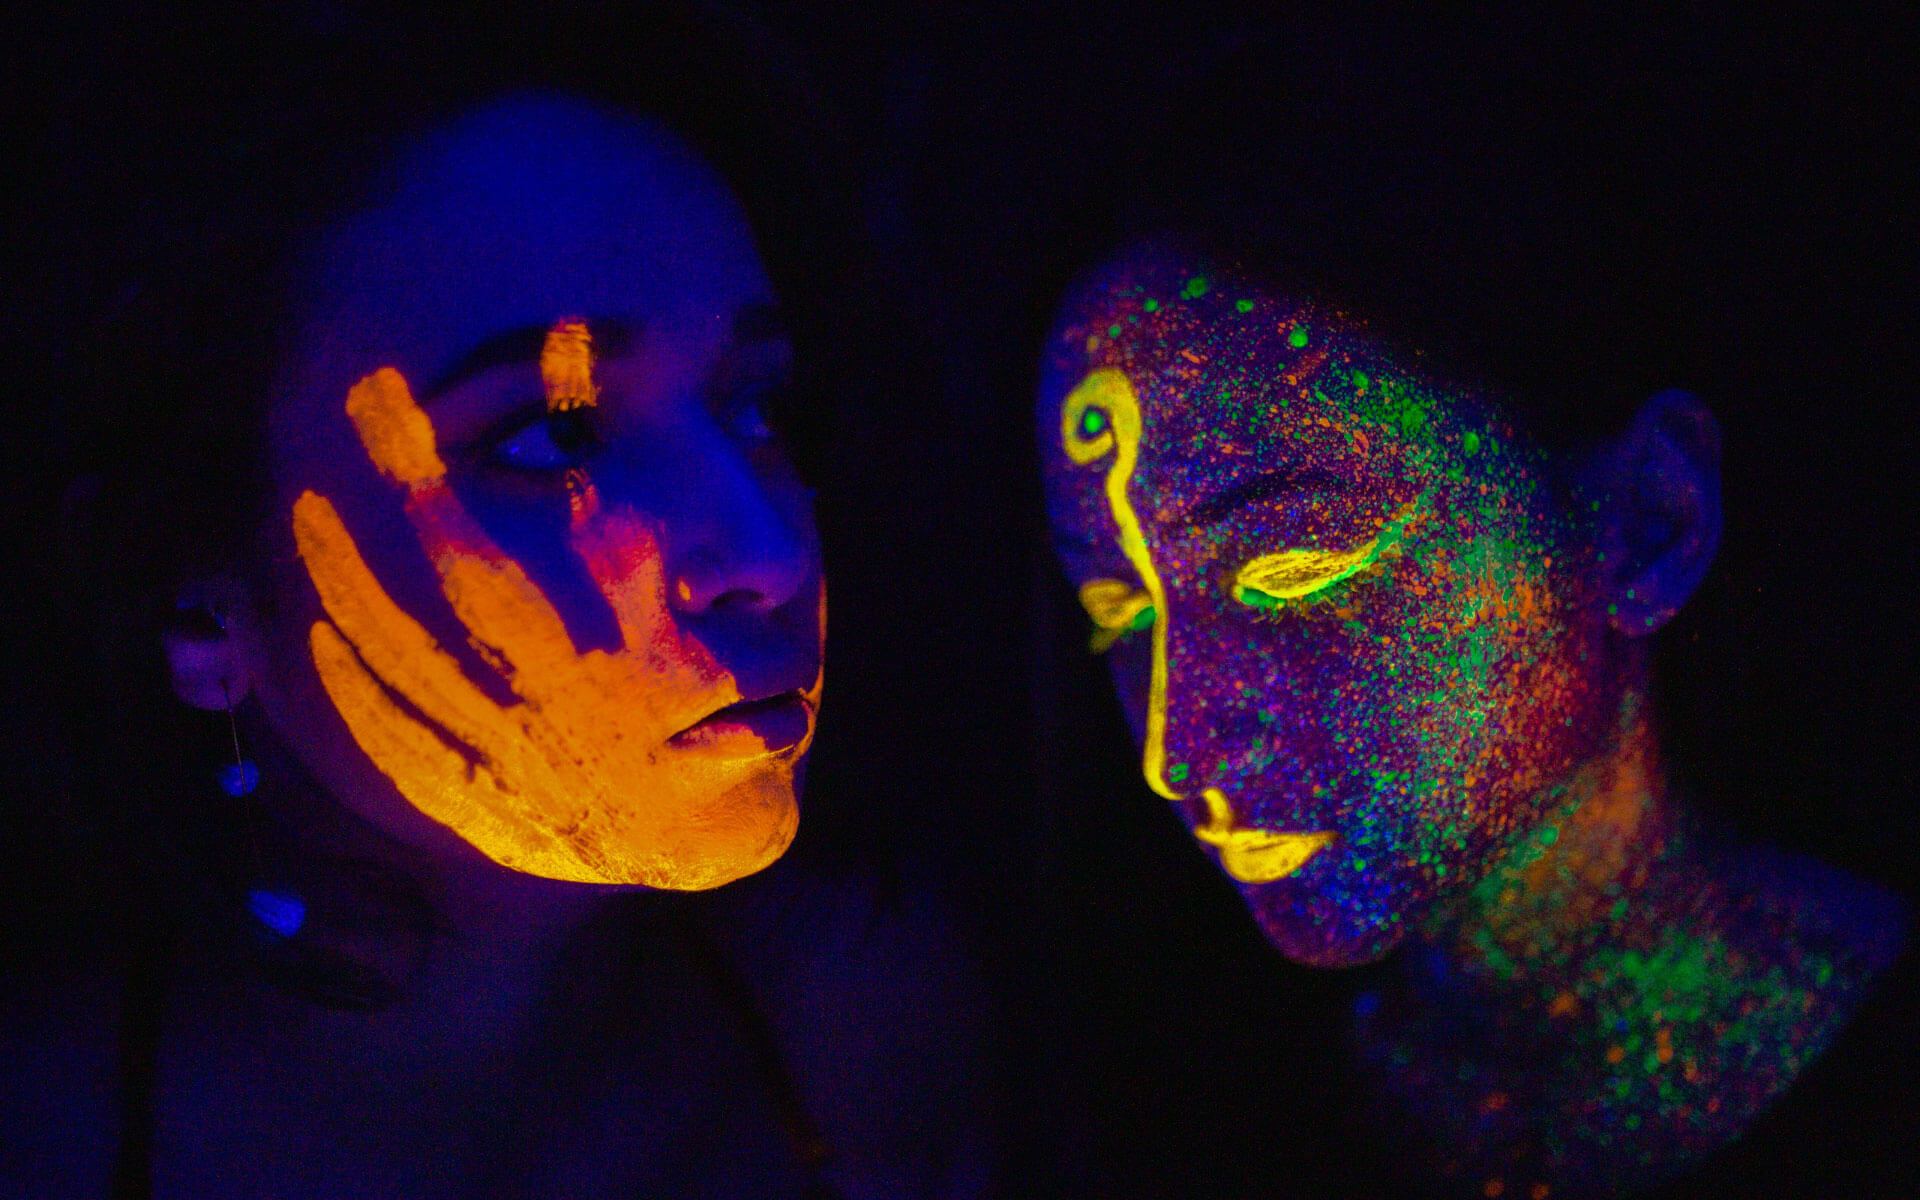 Two women, glowing in the dark, one seemingly attuning to the other